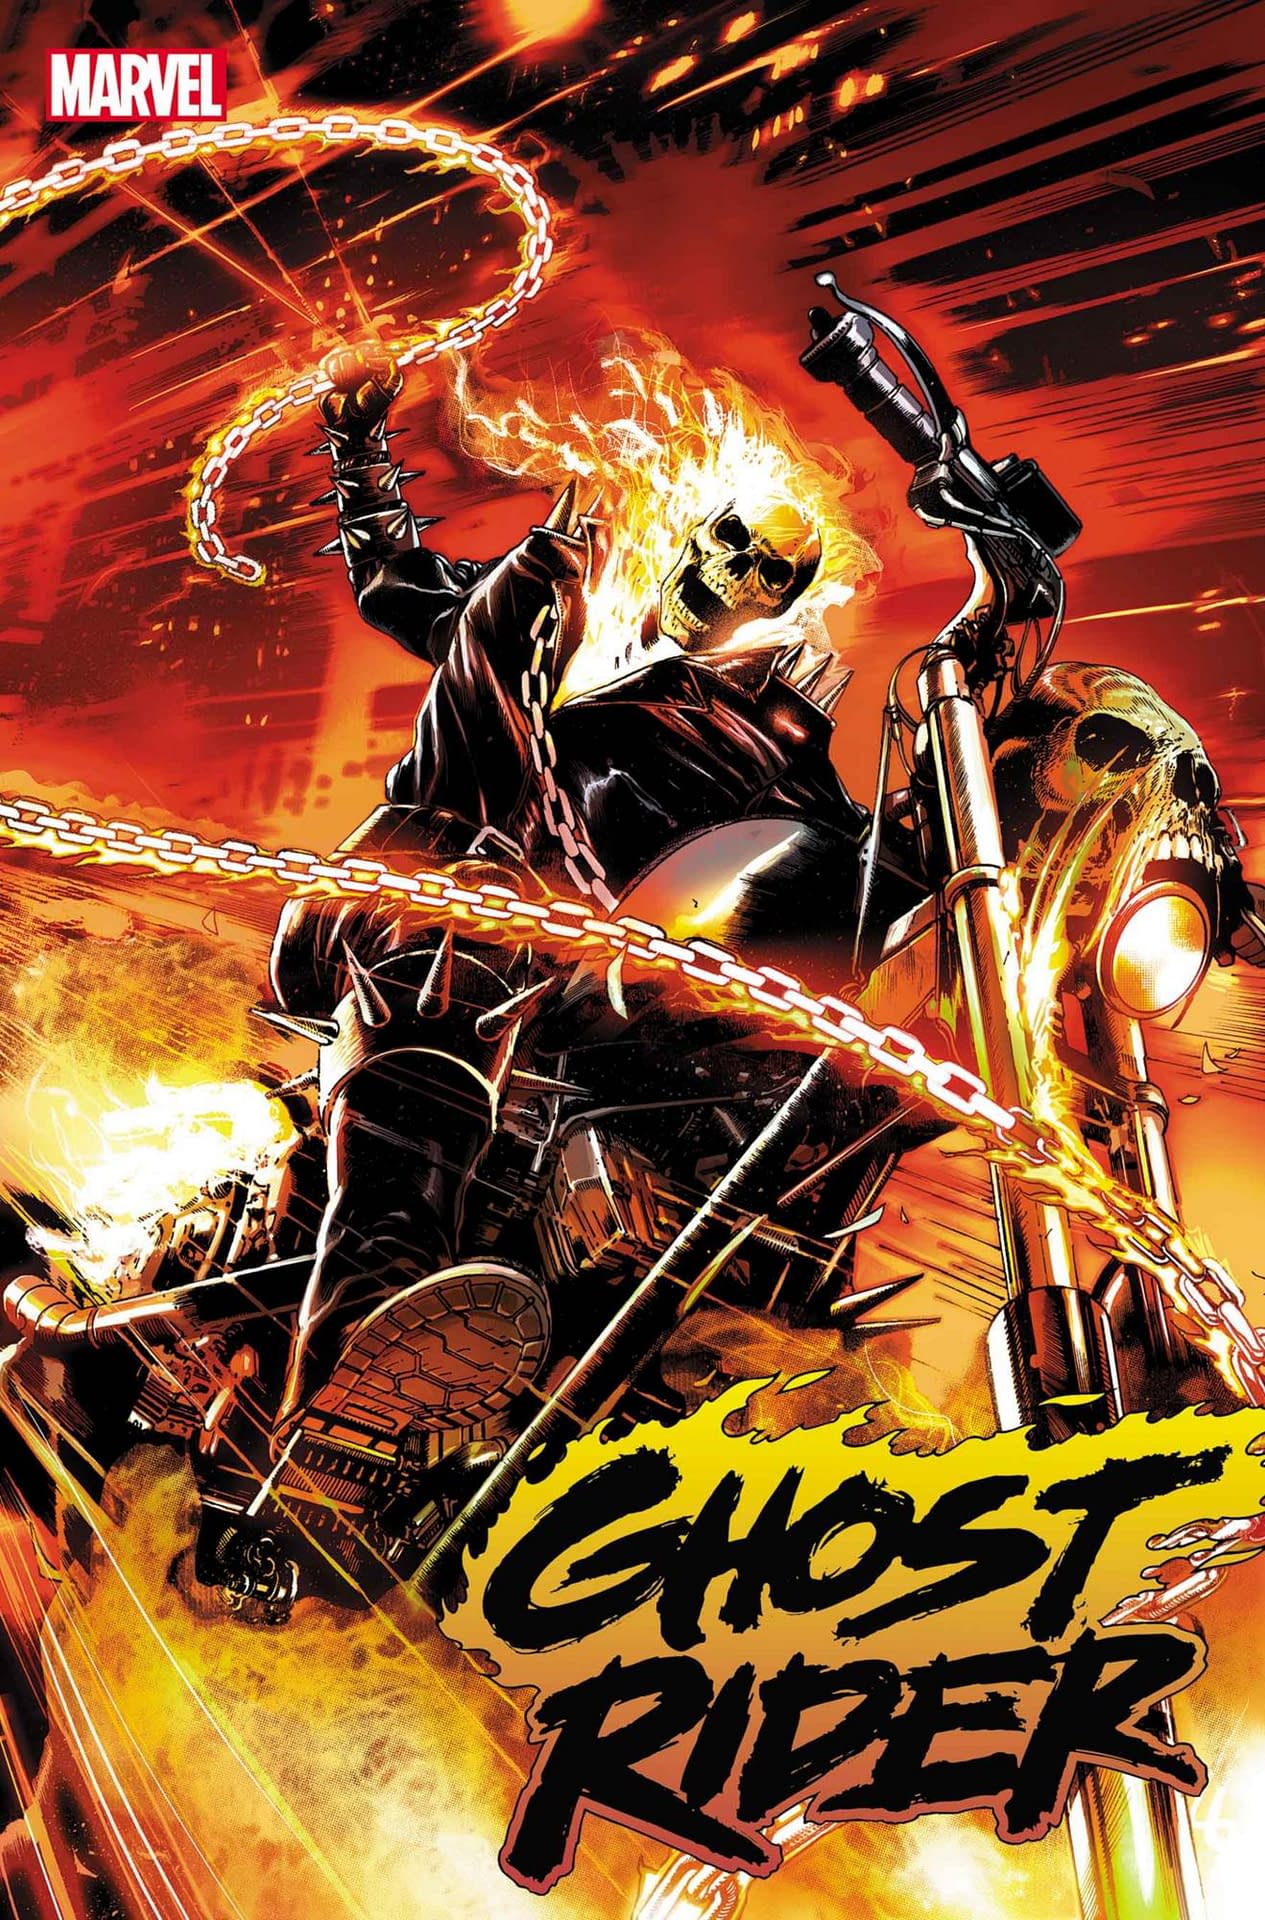 Ghost Rider #5 Preview: Ghost Rider Joins the Marvel Wacky Races